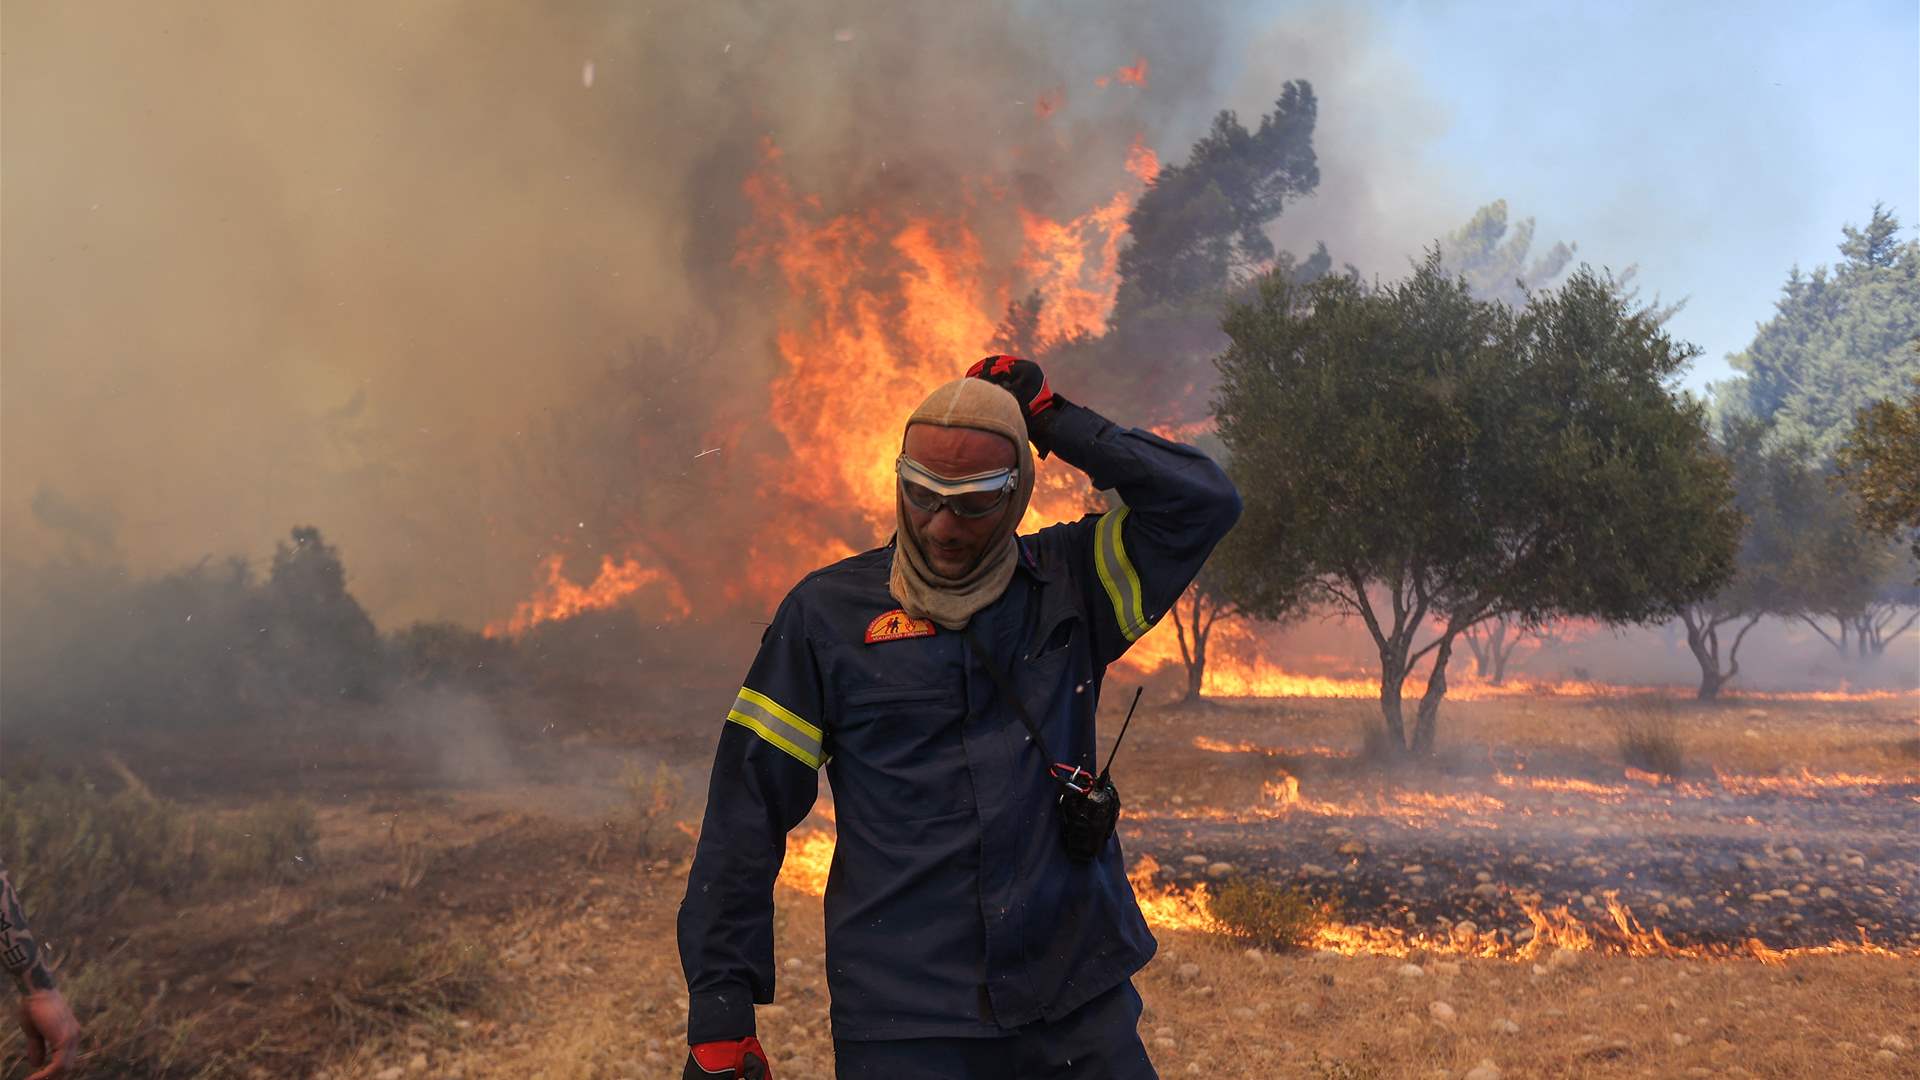 Greek firefighters continue battle against wildfires amidst strong winds